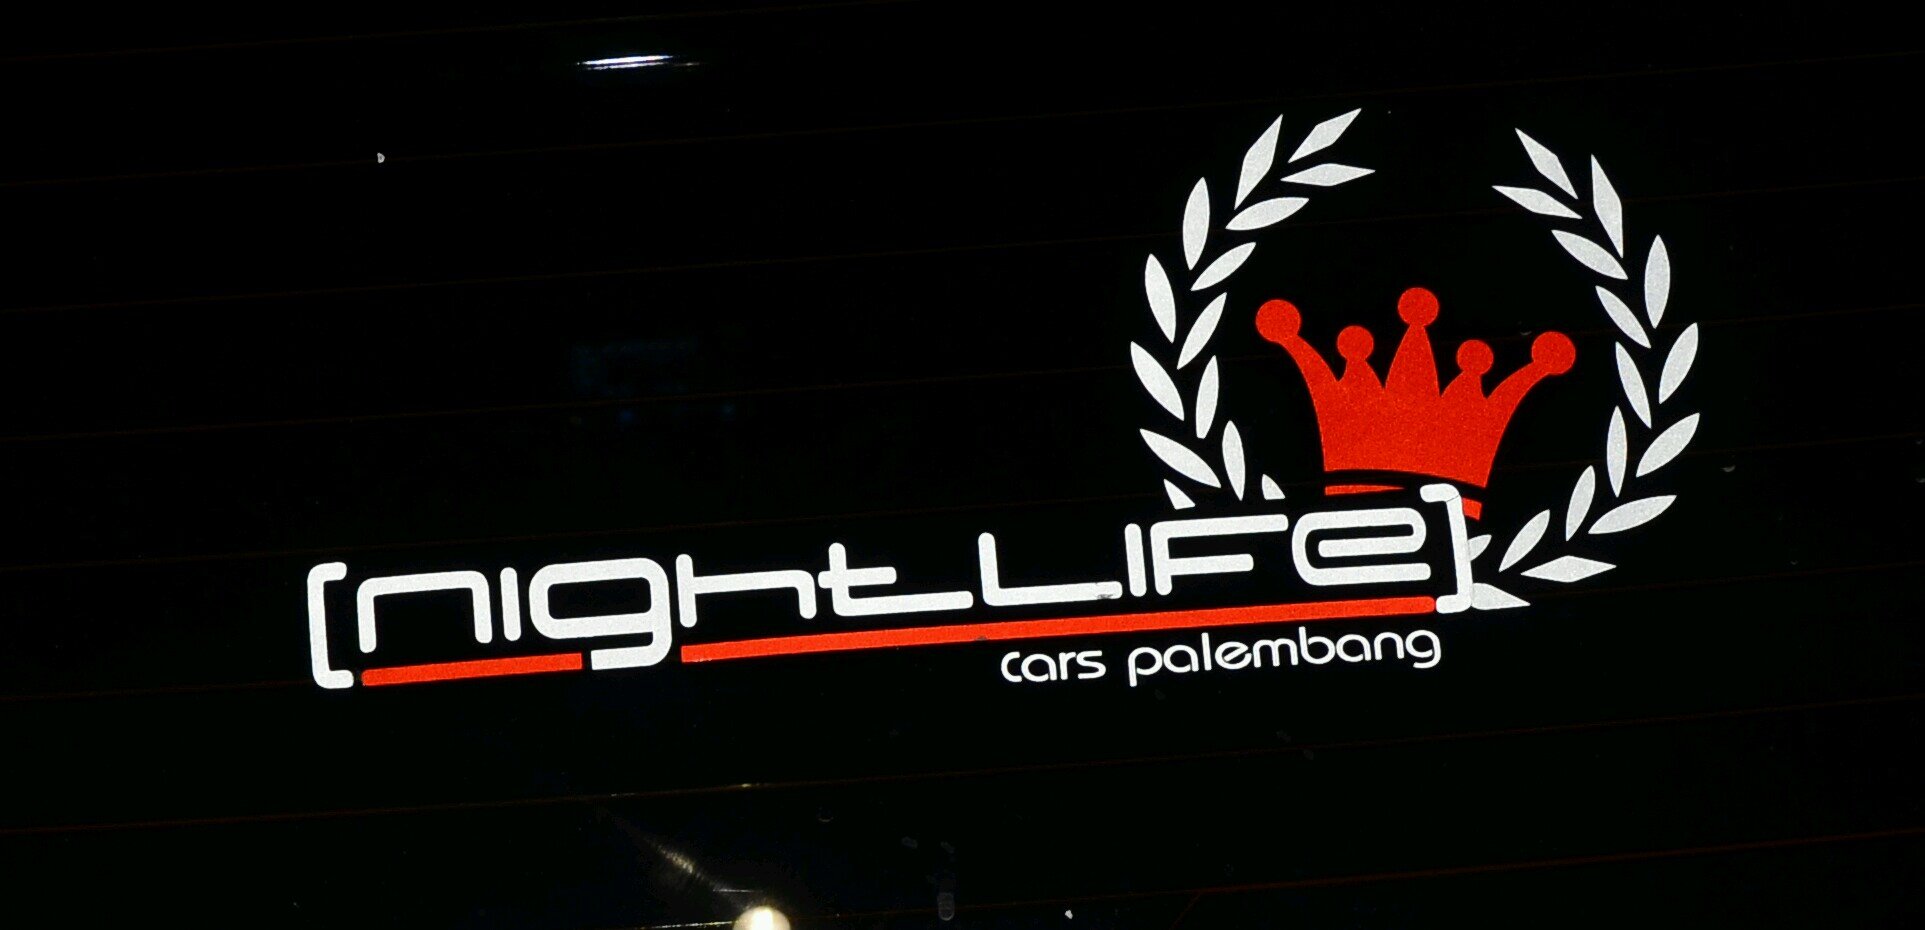 OFFICIAL ACCOUNT NIGHT LIFE PALEMBANG                 JOIN MENTION OR DM BRO                                                path & ig :[nightlife] /nightlife_bg